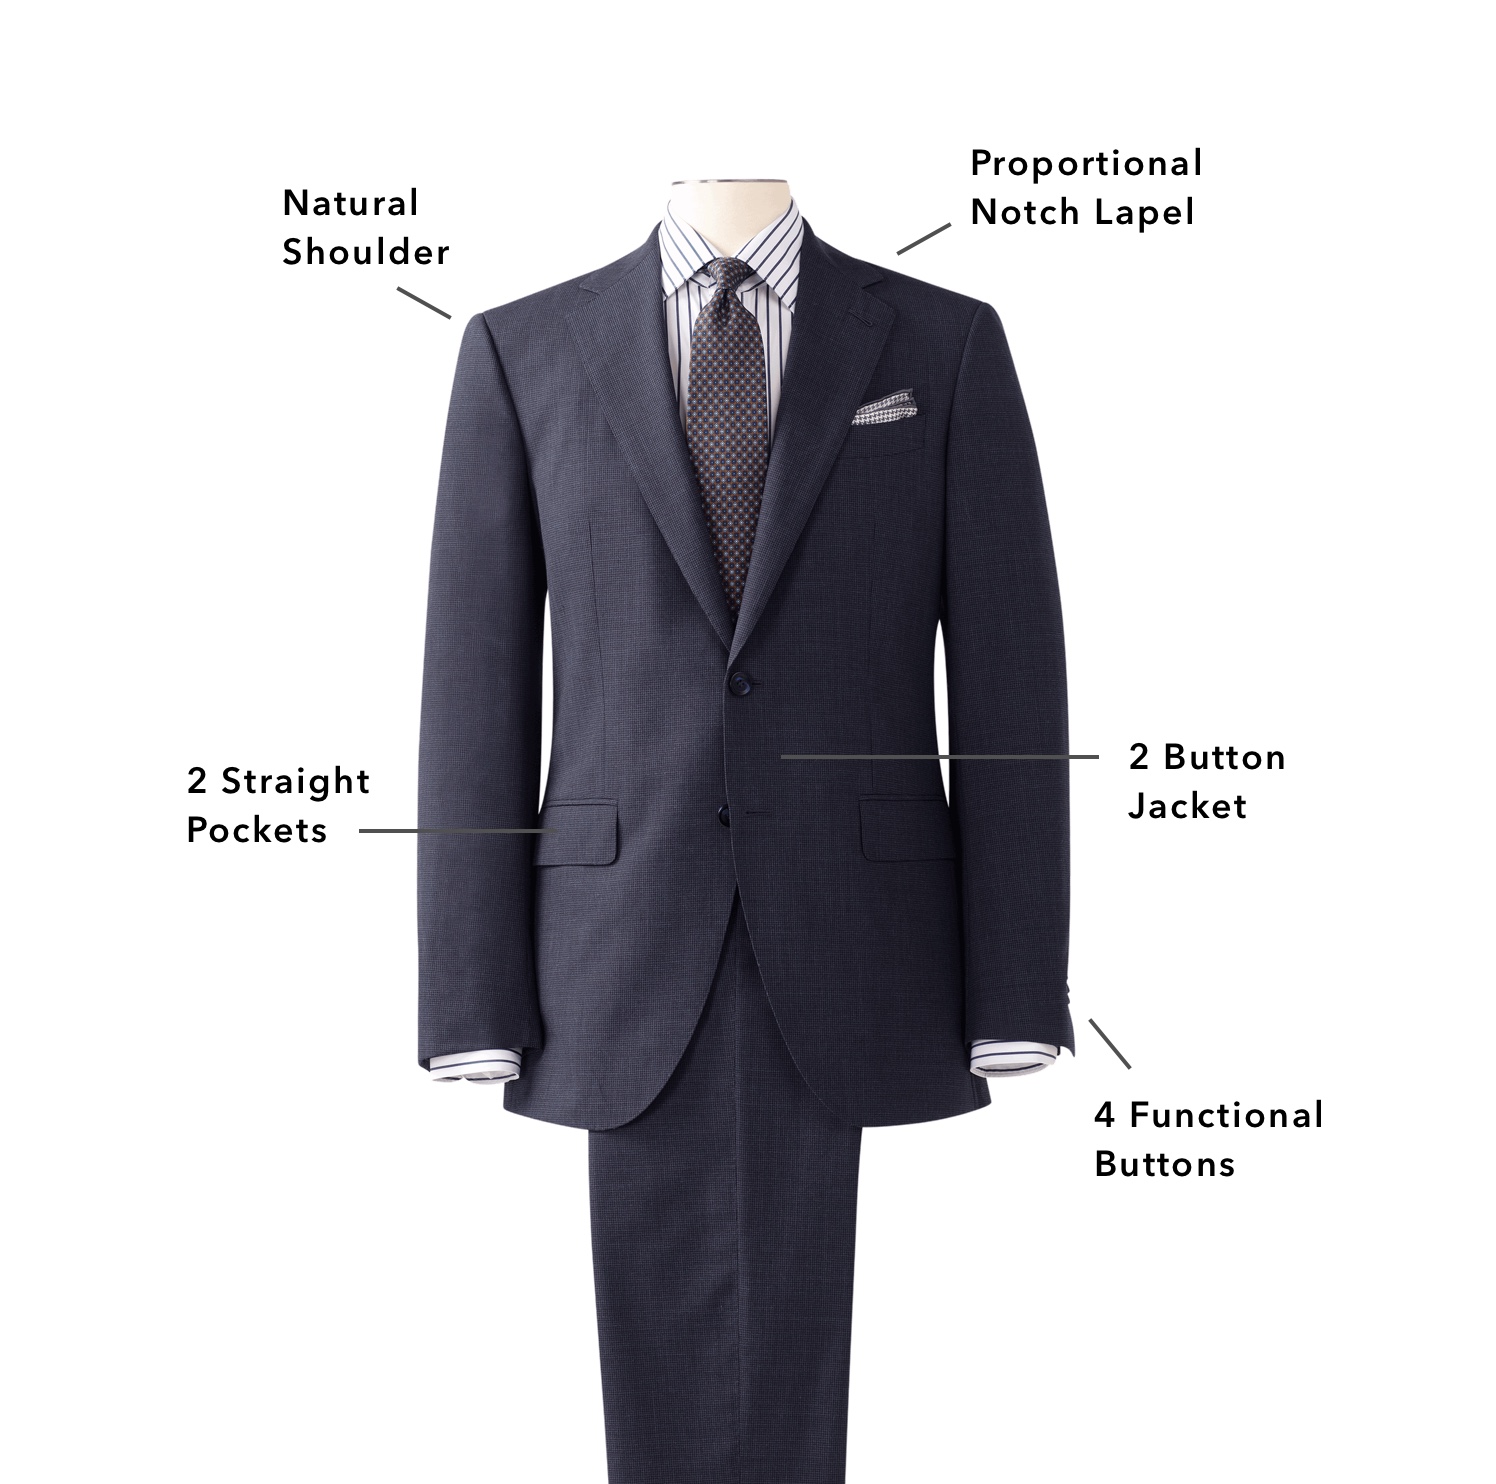 SUITING GUIDE: A CLASSIC NEVER FADES - Knot Standard Blog